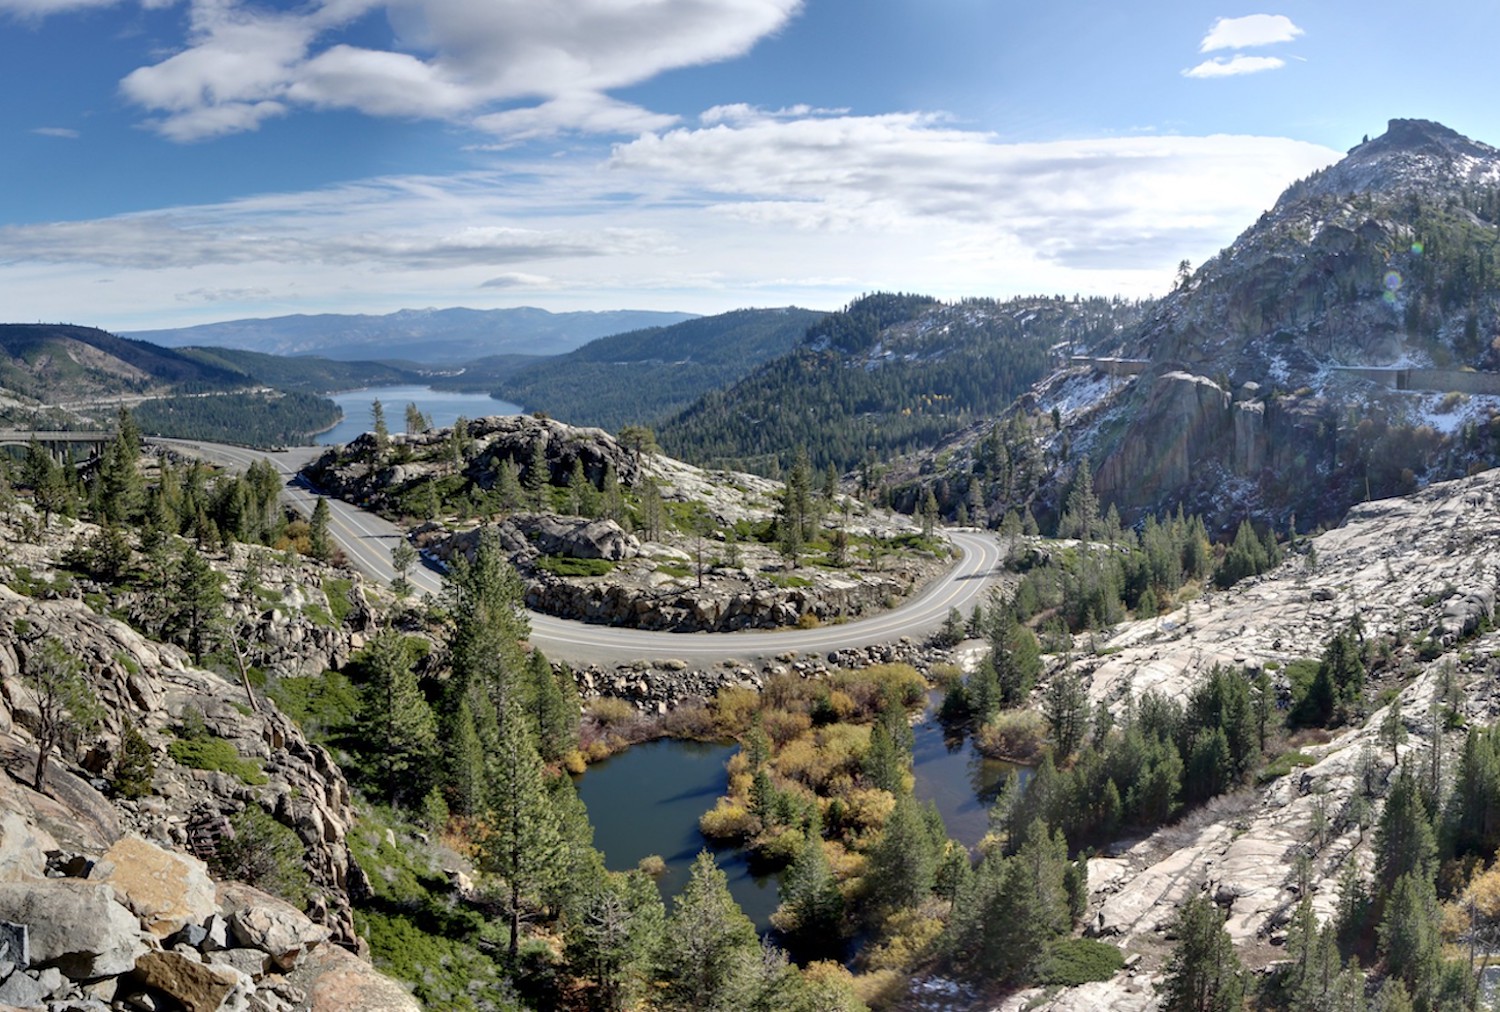 Overview of Donner Memorial State Park